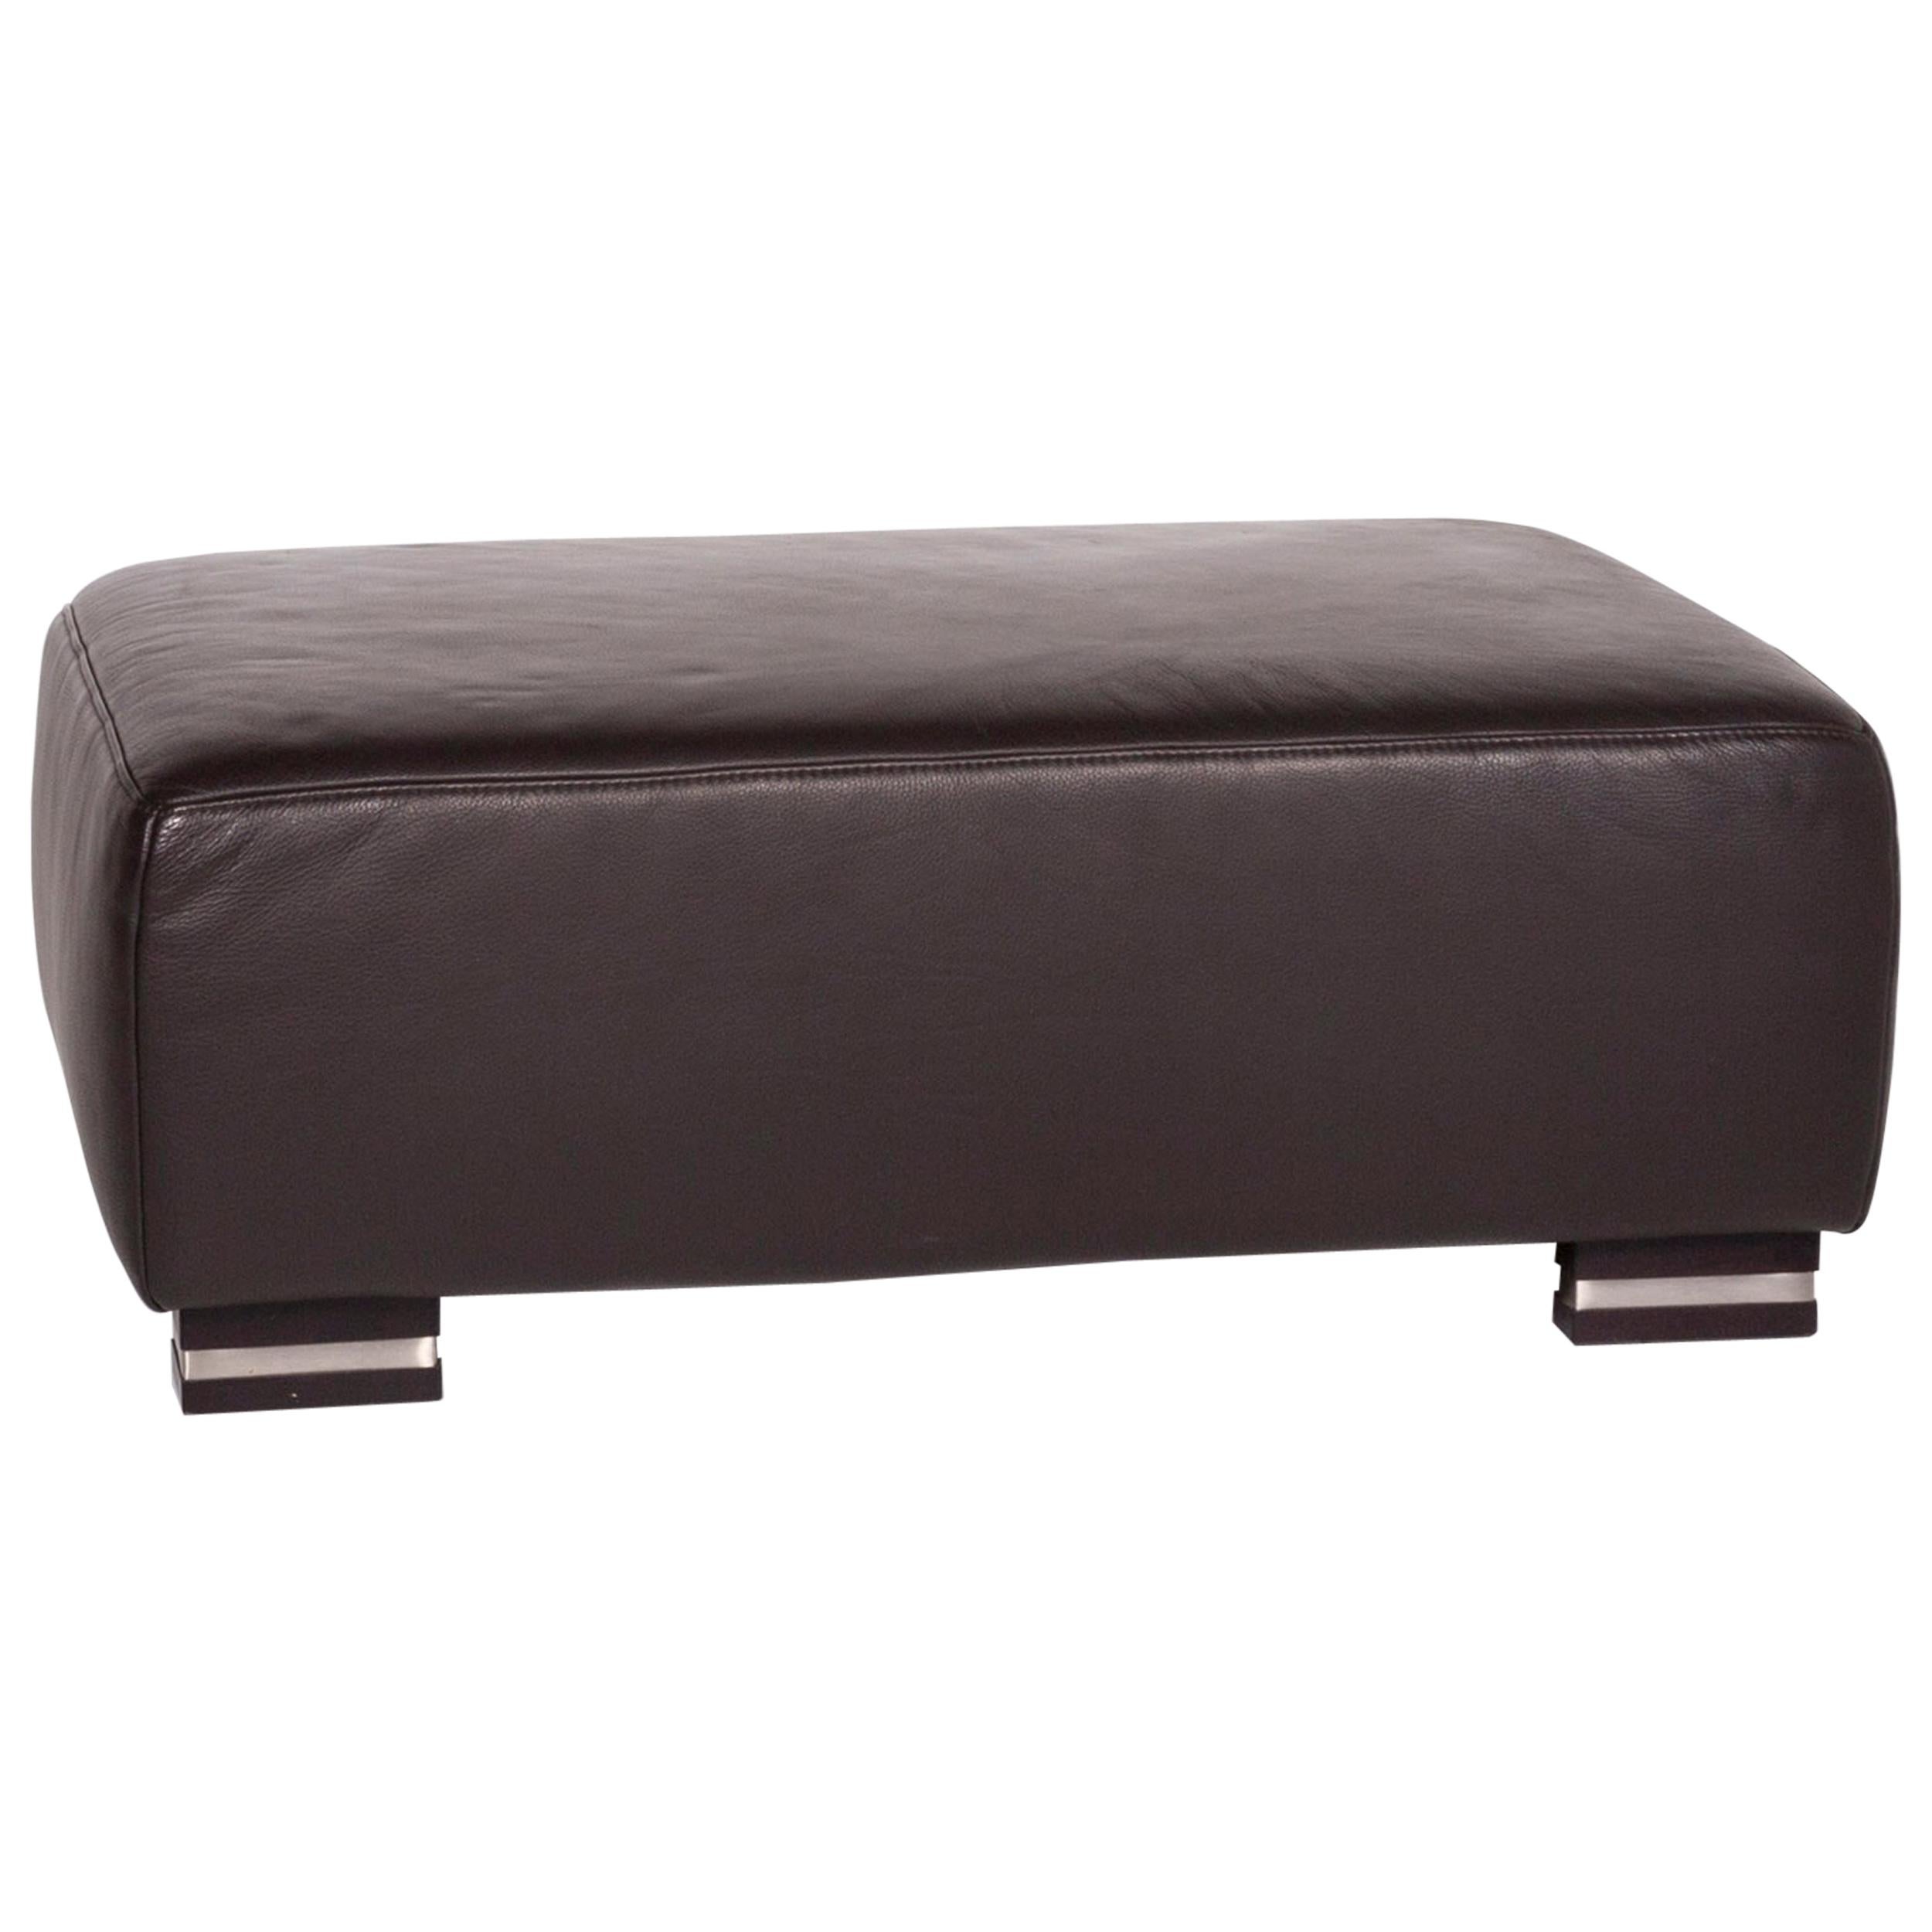 Ewald Schillig Bentley Leather Stool Brown Ottoman For Sale